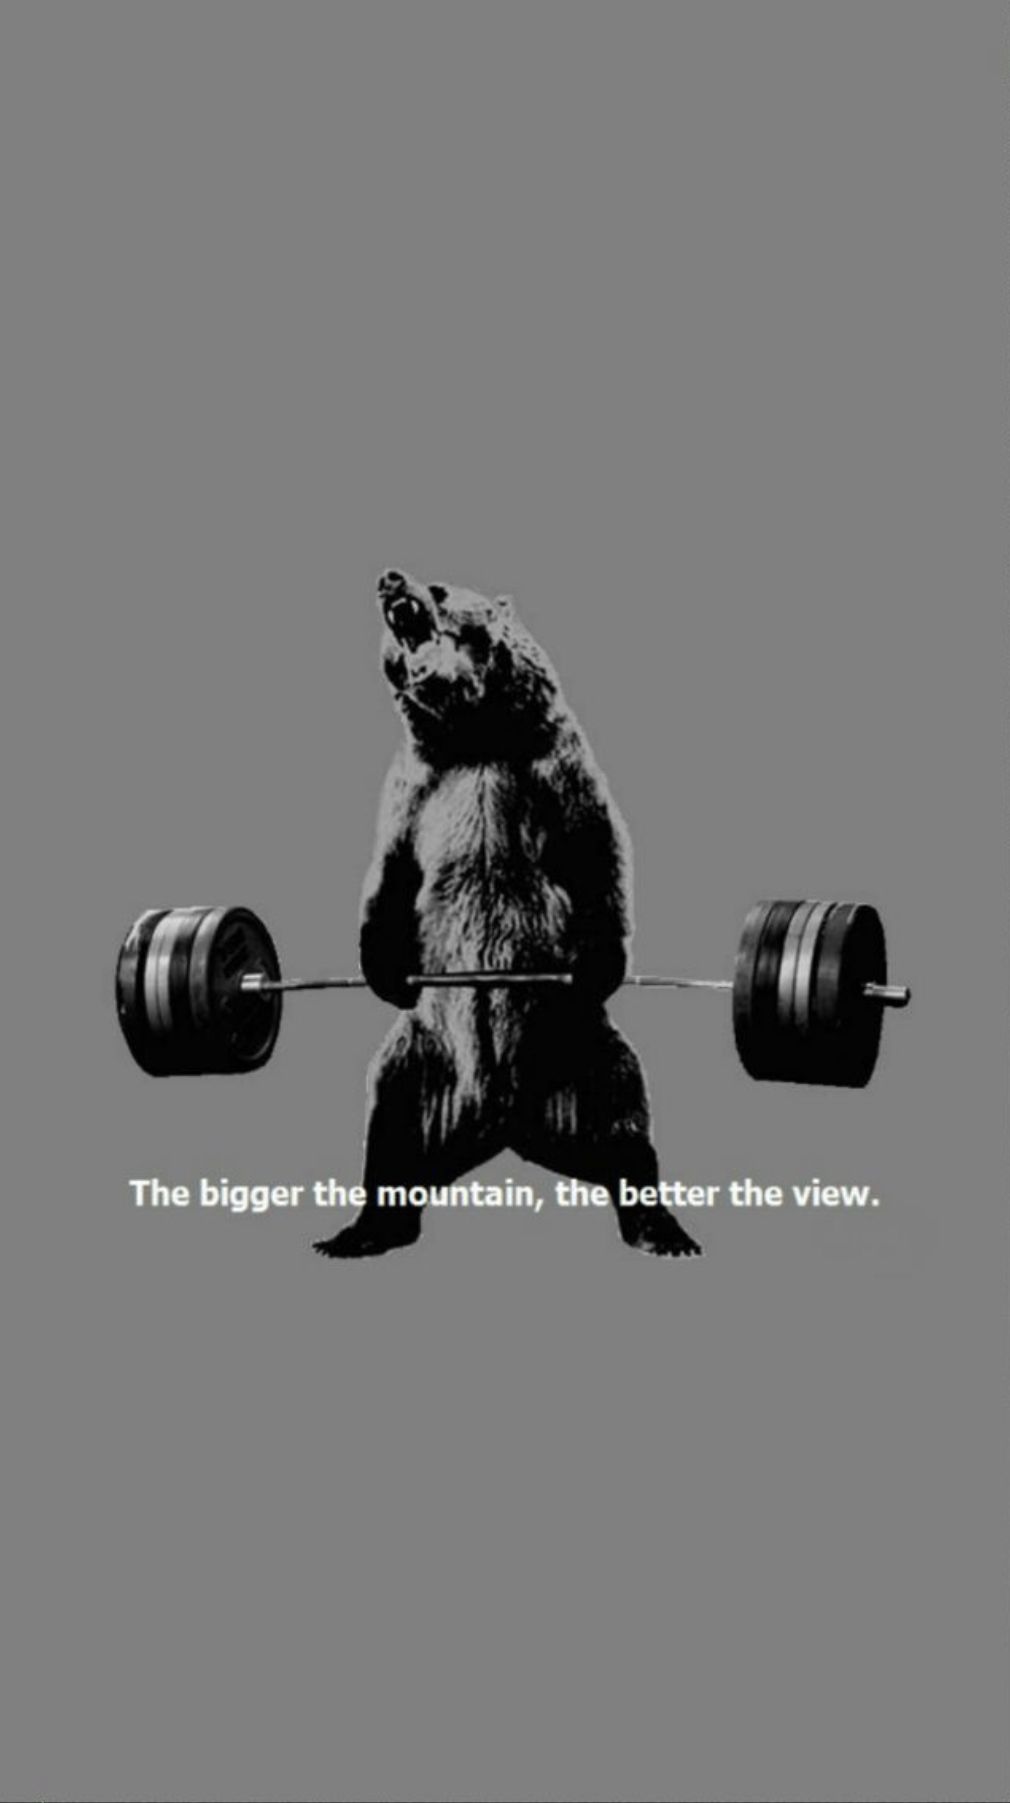 The bigger the mountain, the better the view. - Gym